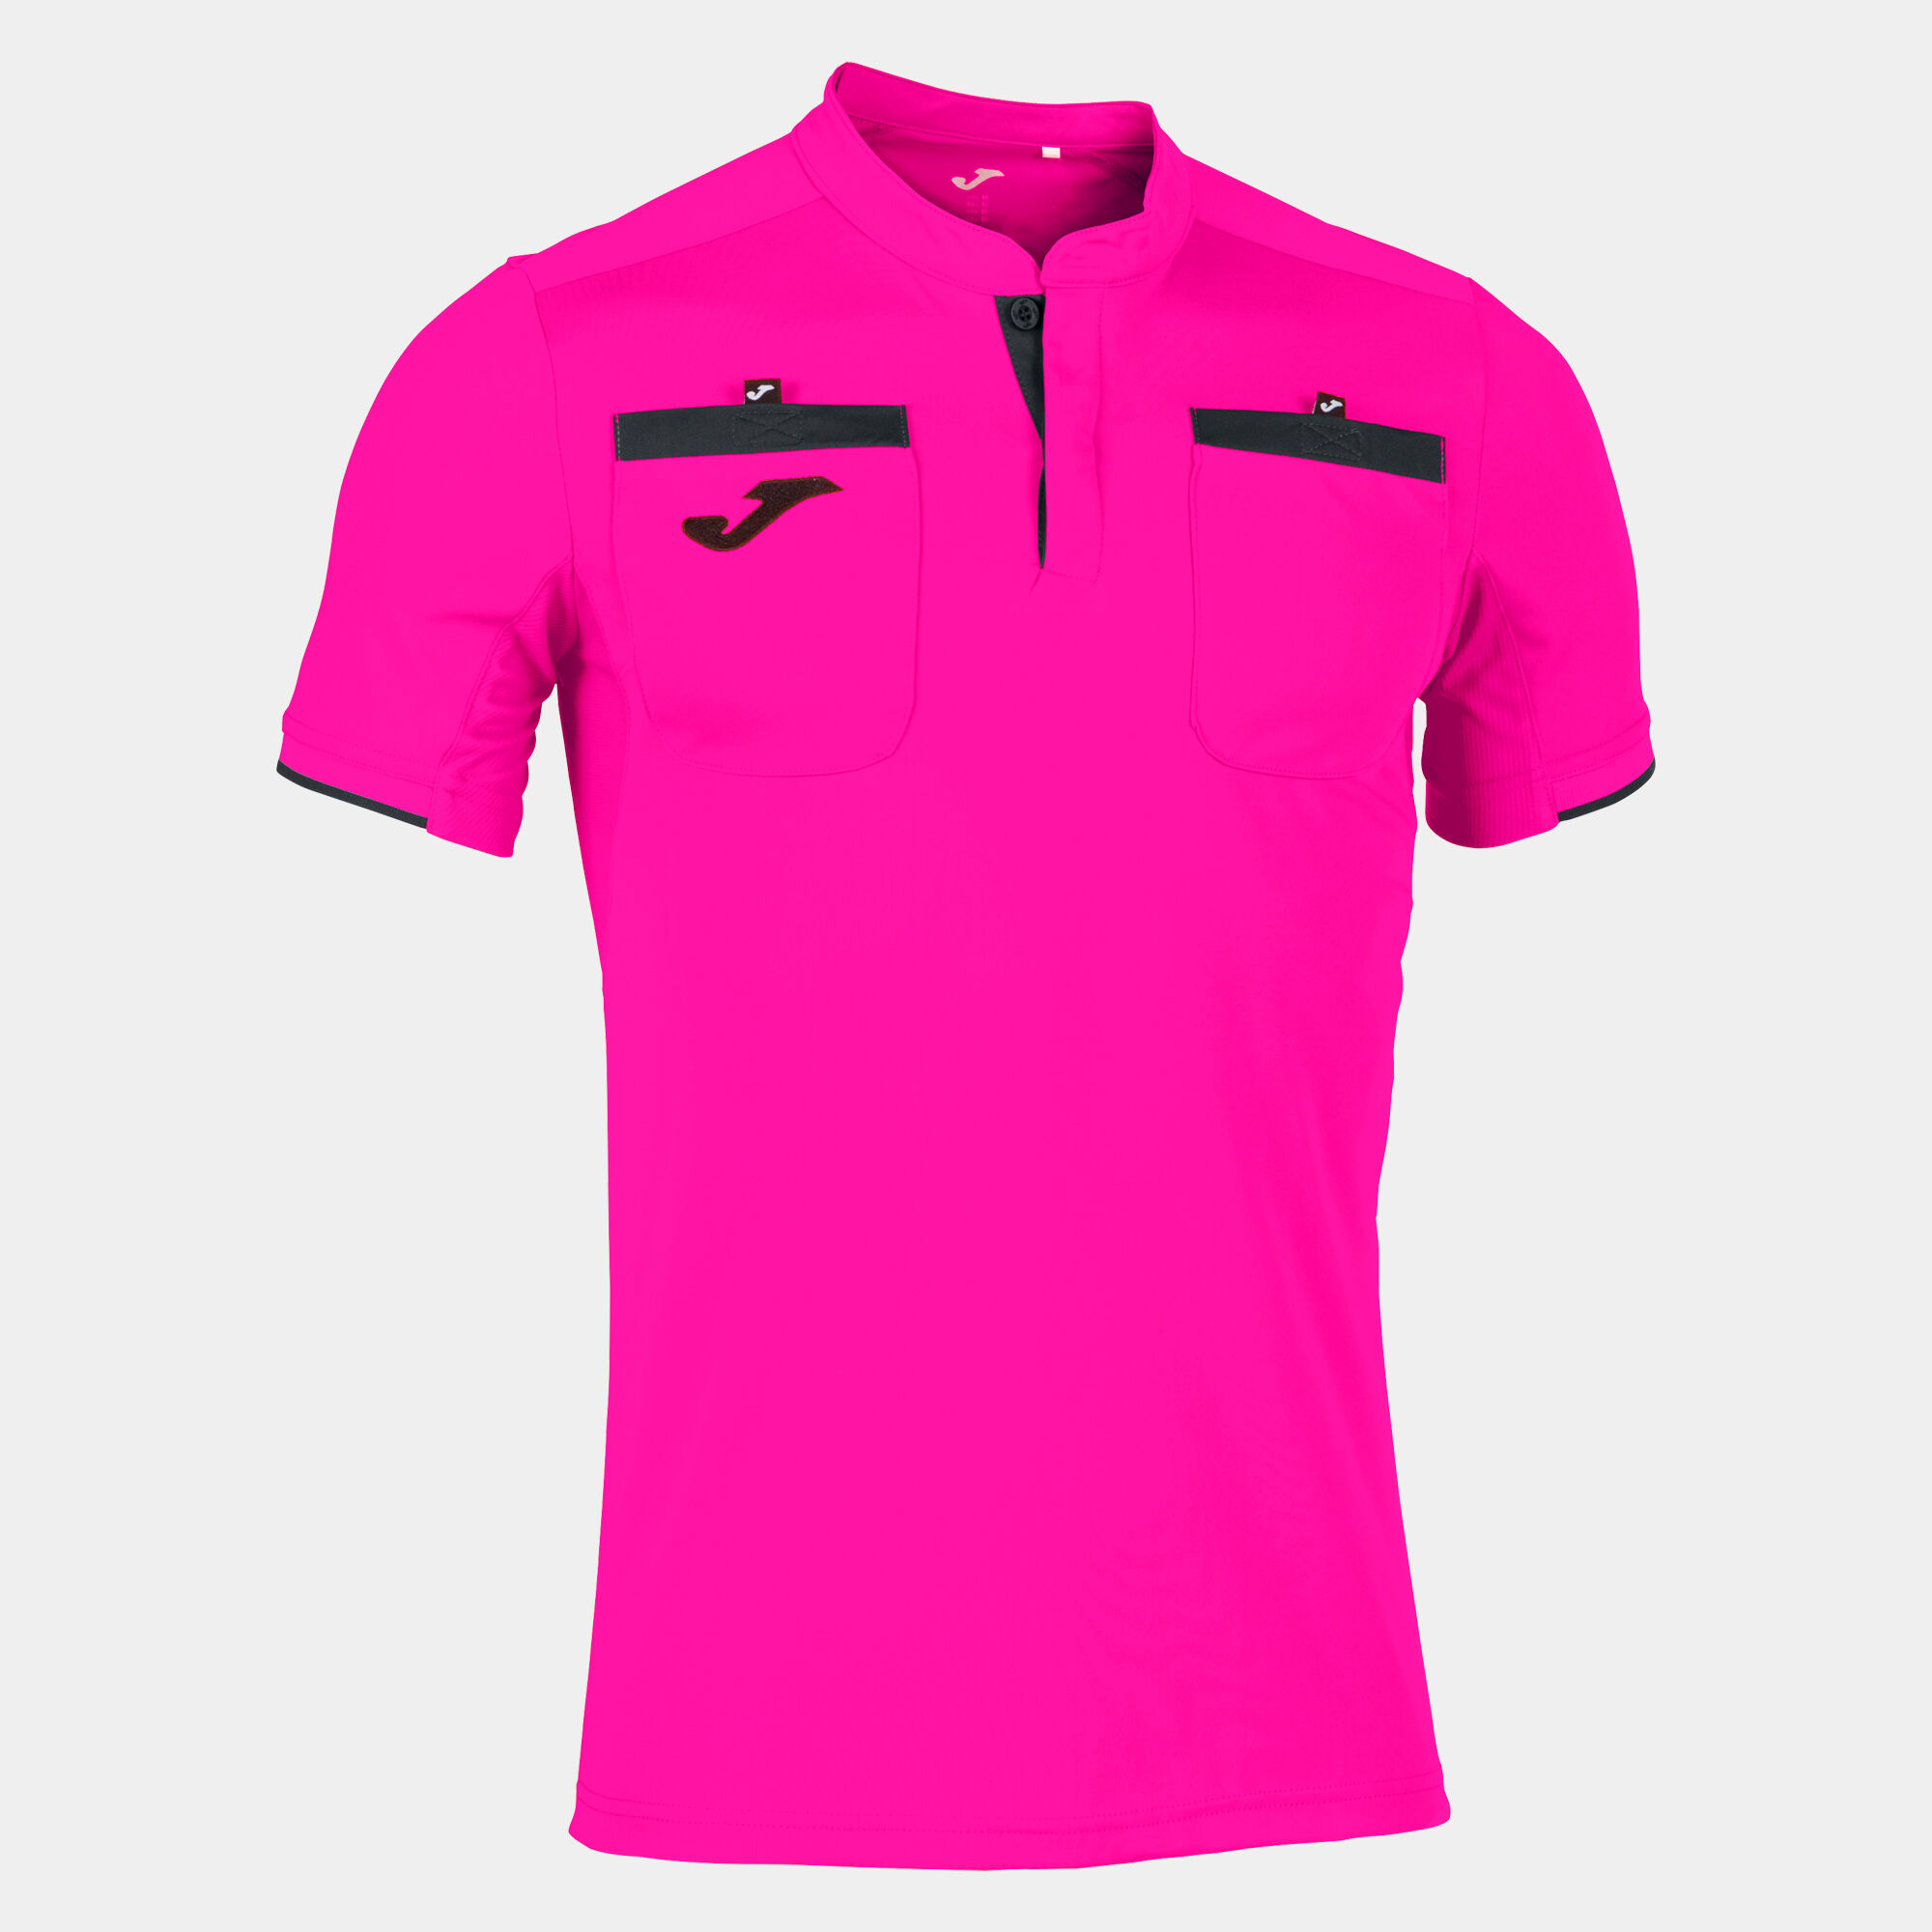 MAILLOT MANCHES COURTES HOMME REFEREE ROSE FLUO